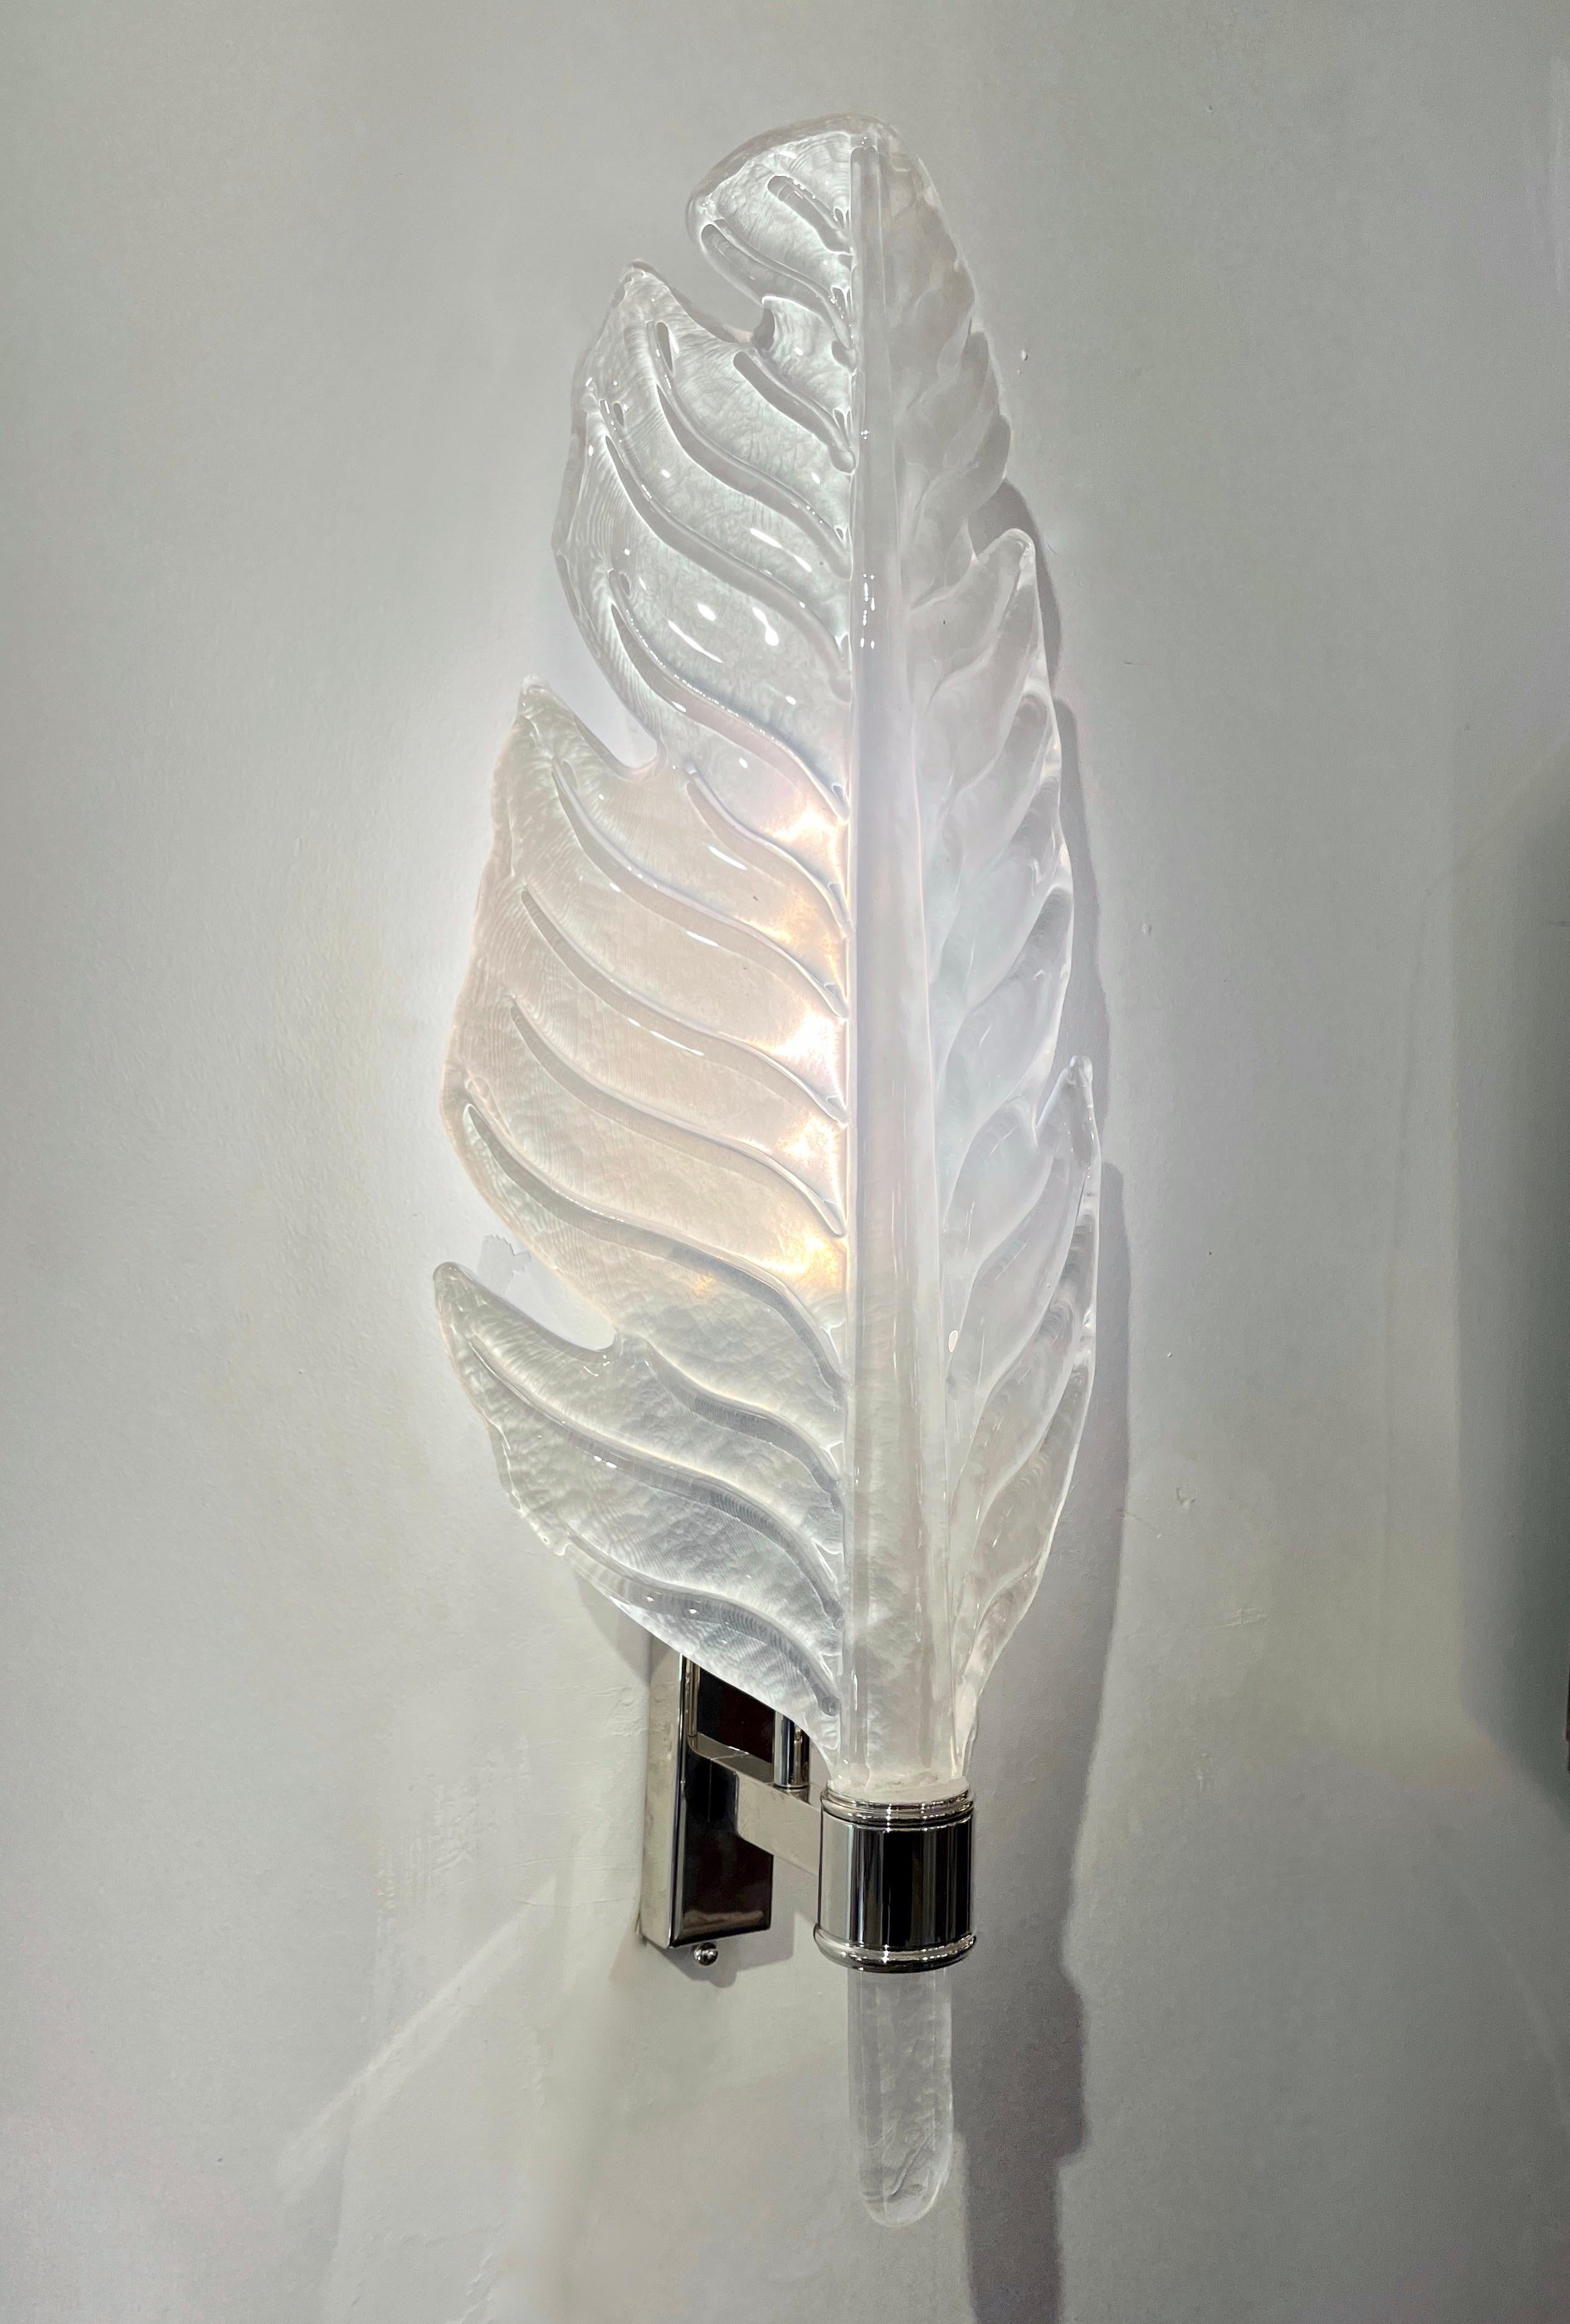 Very elegant pair of bespoke wall lights in blown Murano glass in the style of Barovier, with an Art Deco design feather leaf organic modern shape. Entirely handcrafted in Italy, the high-quality white Murano glass has a pearl luminosity iridescence